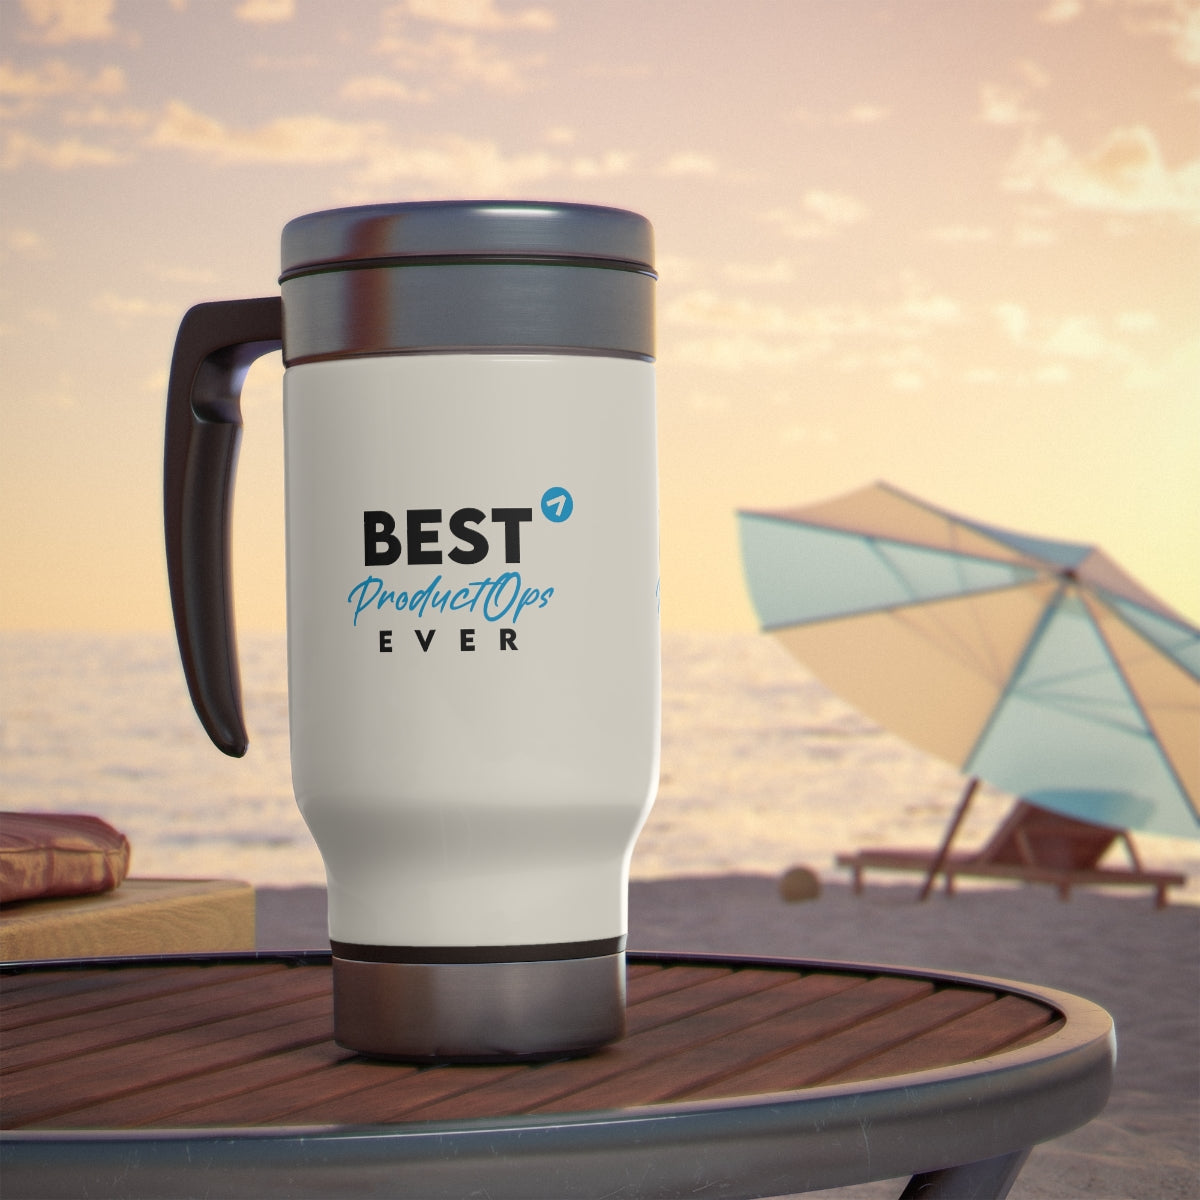 Best Product Operations ever - Light blue - Stainless Steel Travel Mug with Handle, 14oz